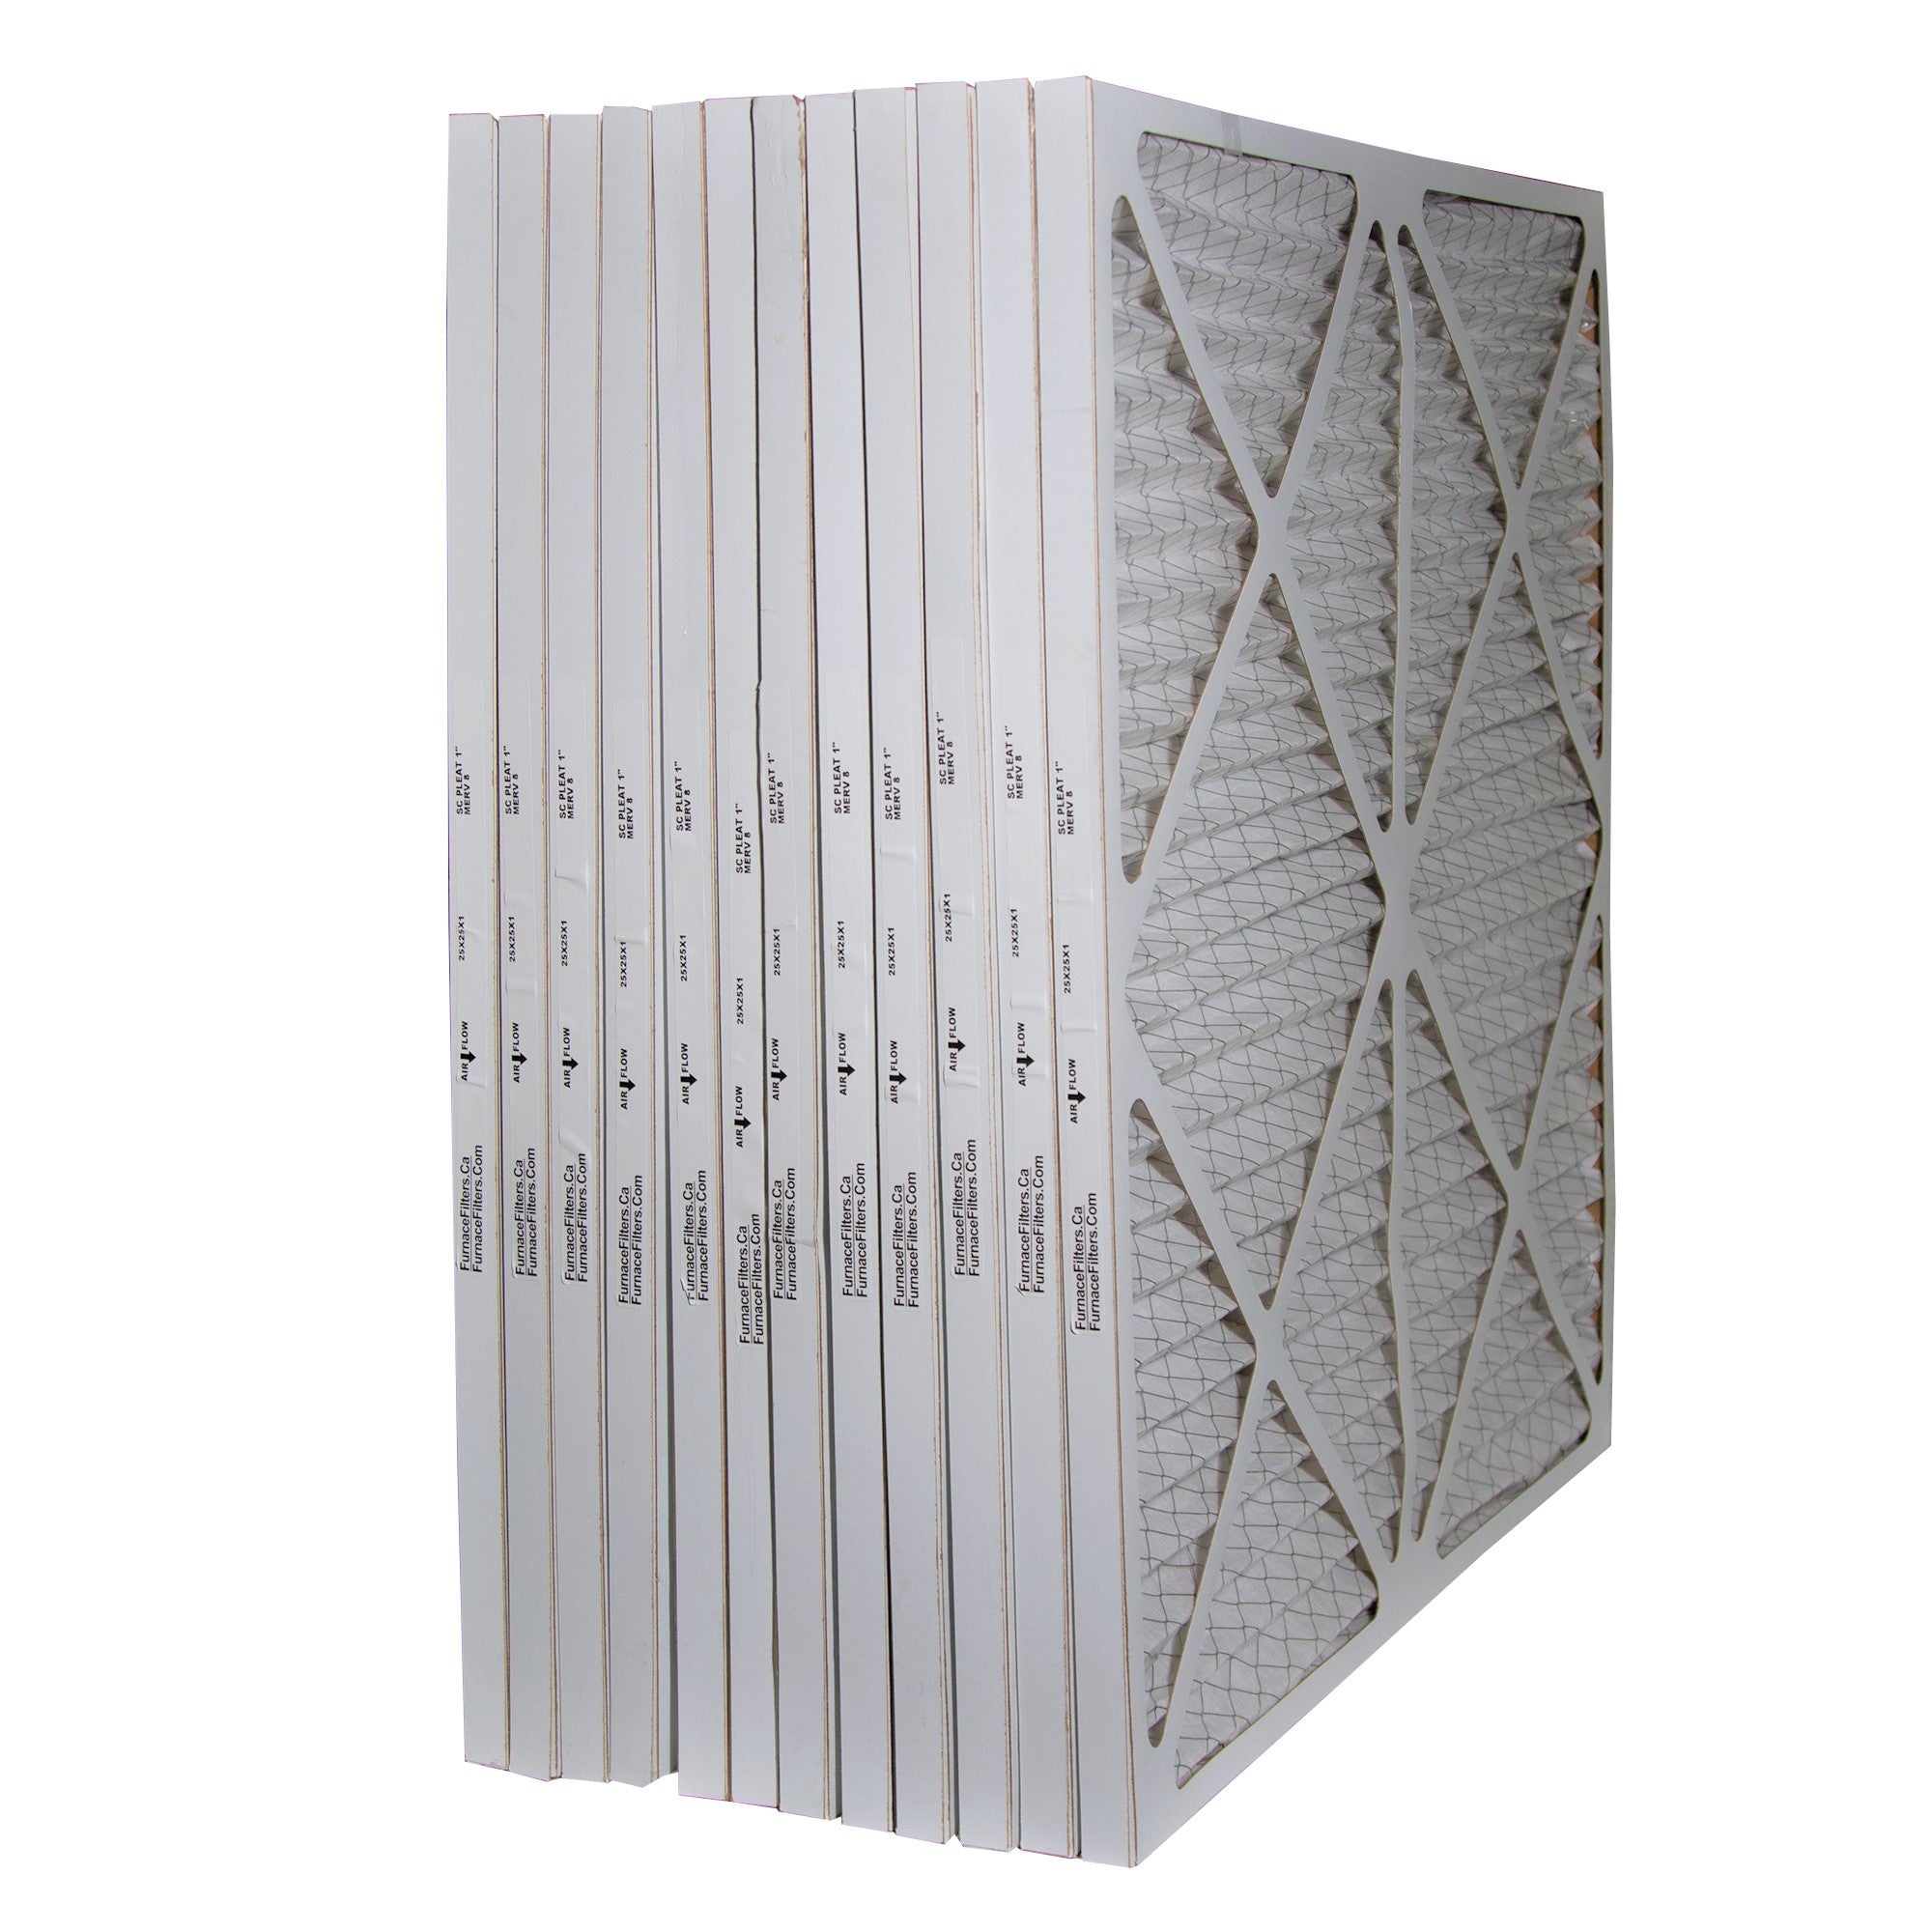 25x25x1 Furnace Filter MERV 8 Pleated Filters. Case of 12.